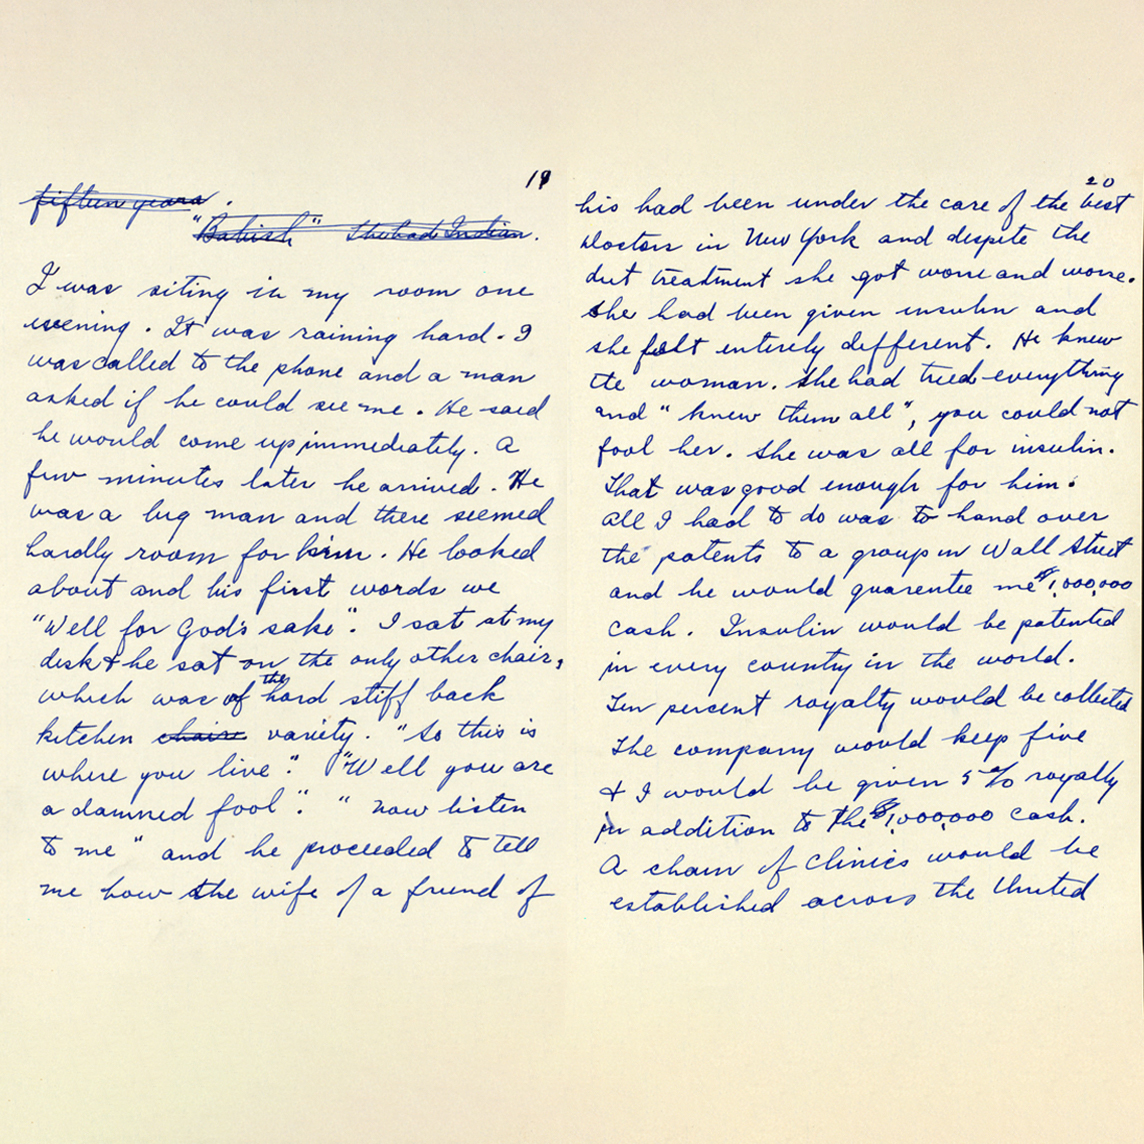 Diary entry from Banting detailing his feelings about selling the insulin to Wall Street.